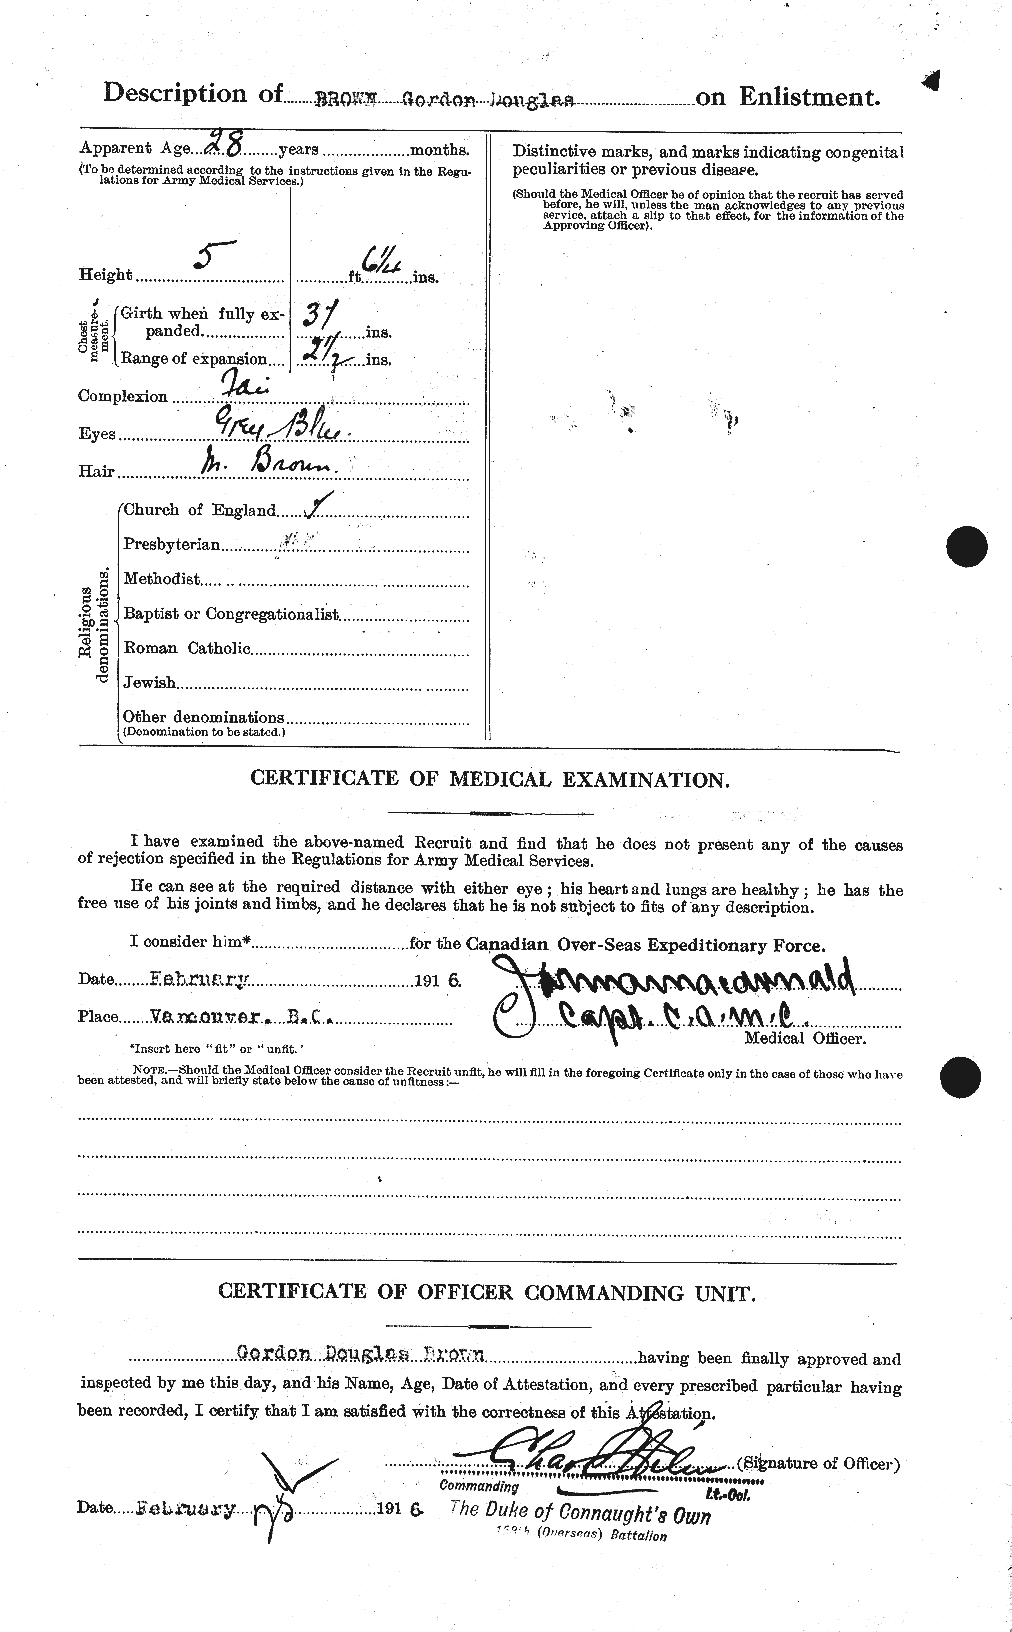 Personnel Records of the First World War - CEF 262632b